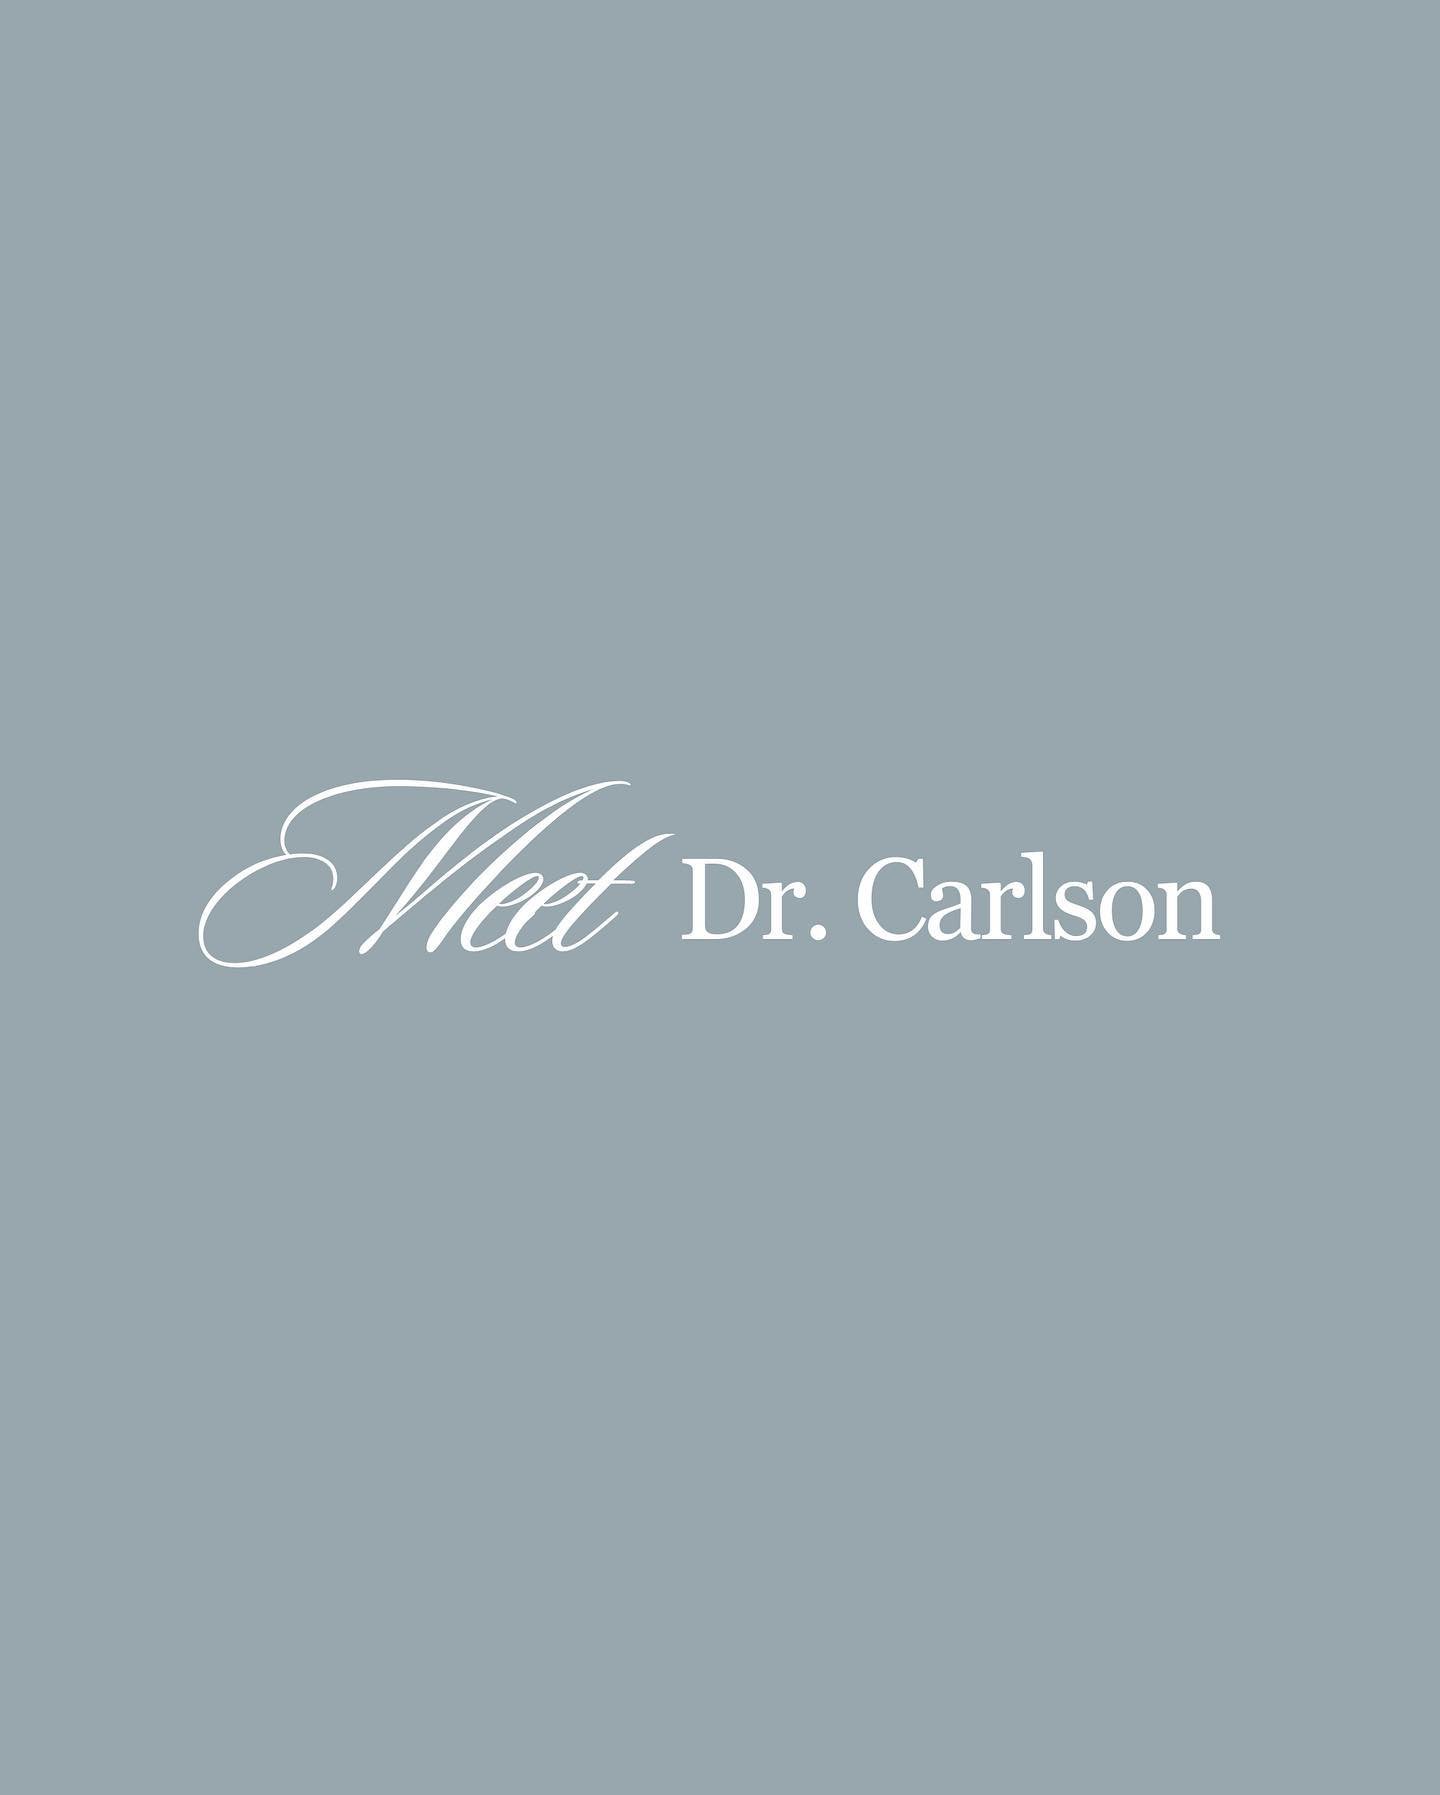 Introducing our newest client, the one and only Dr. Carlson! 

Dr. Carlson is a general surgeon specializing in robotic surgery, based in Augusta, GA, and affiliated with Augusta Surgical Group. Let&rsquo;s all give him a warm welcome!

#madmarketin